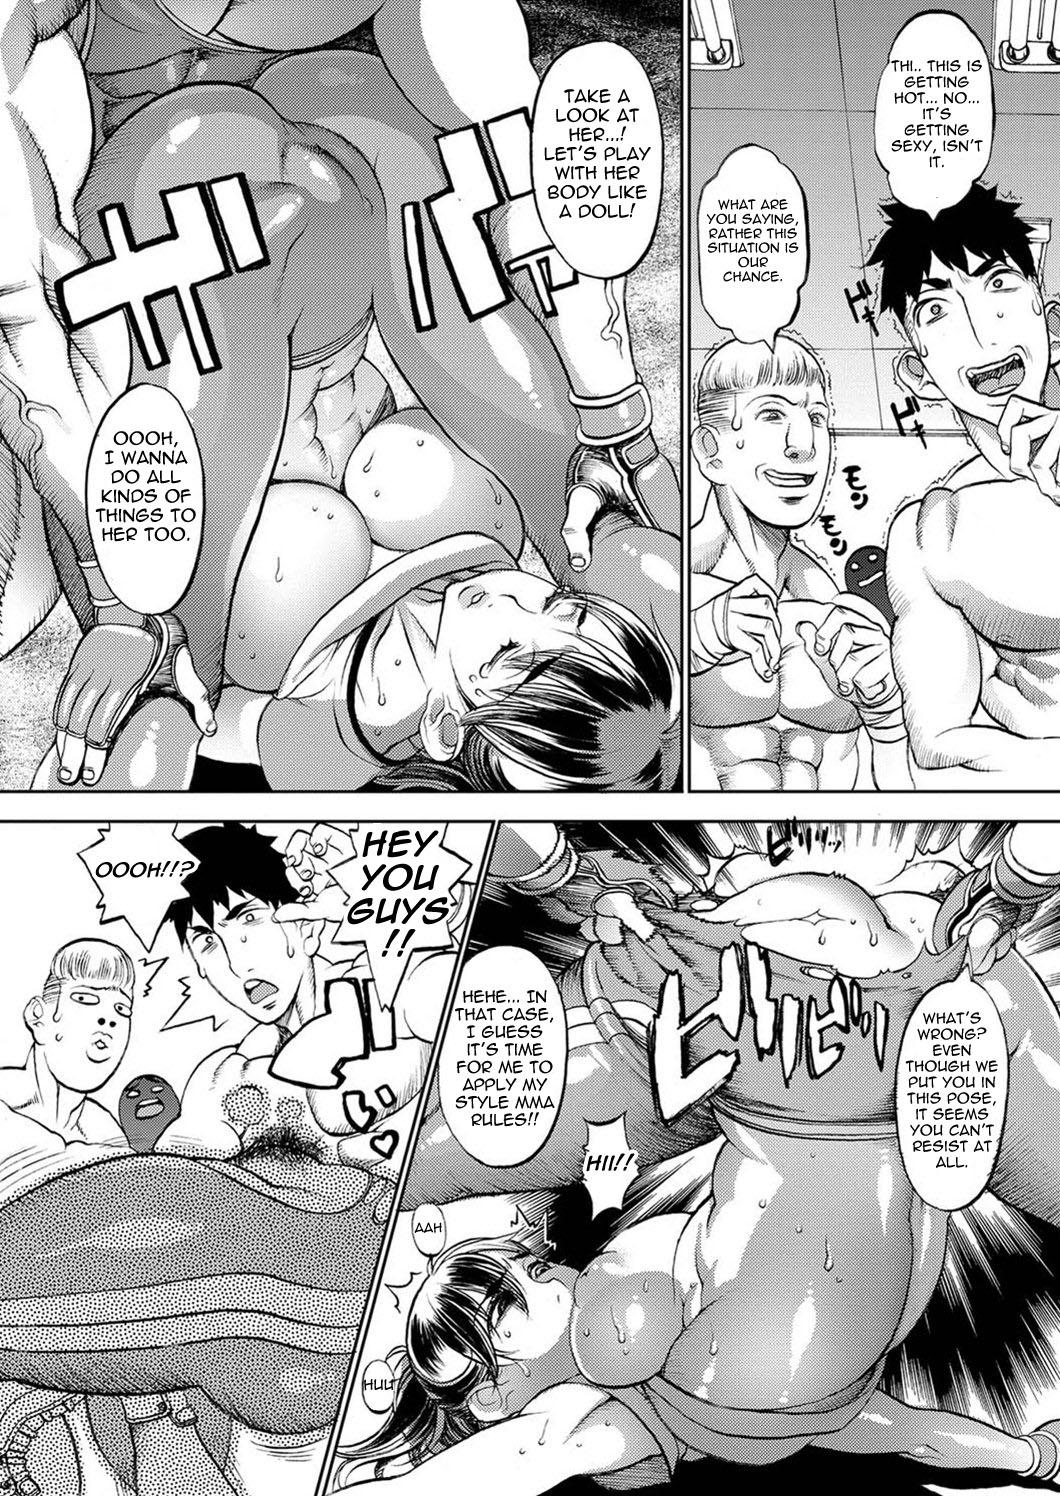 Babysitter Ultimate Fighter Yayoi Reversecowgirl - Page 8